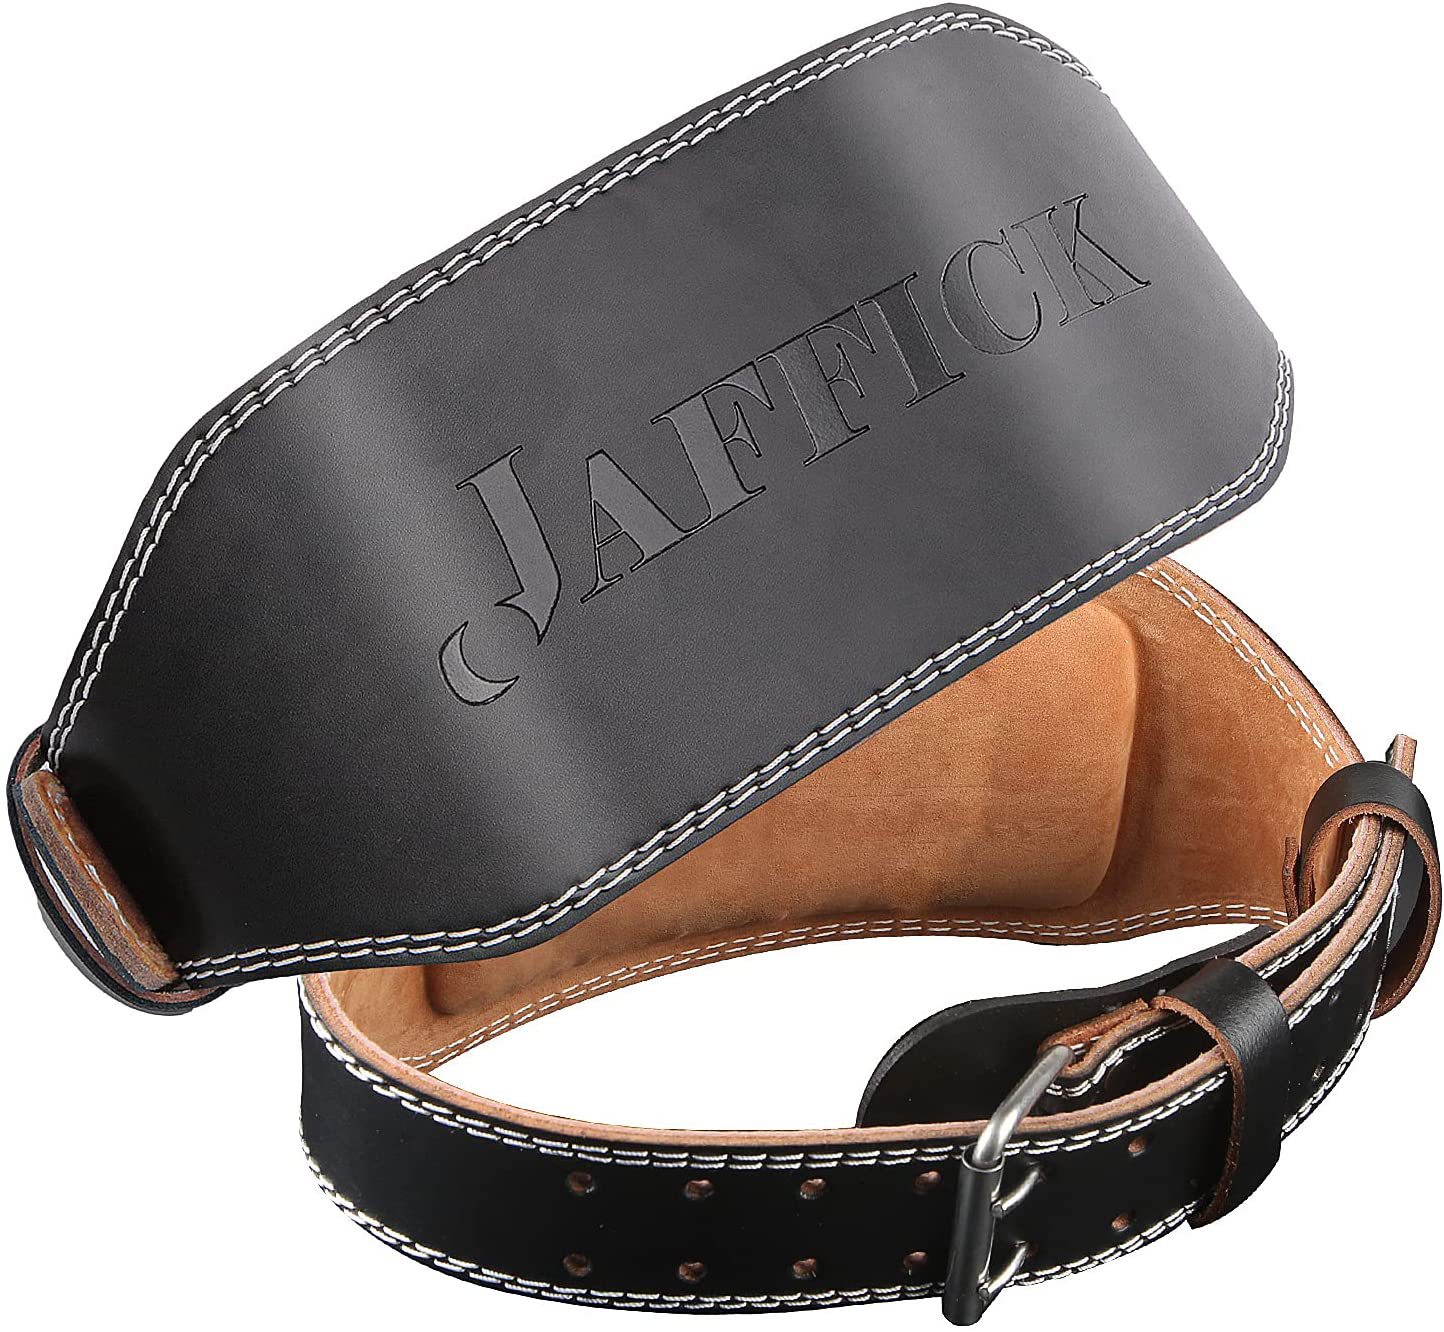  Jaffick Weight lifting Belt for 7MM Leather Pro Power Gym Belt  Heavy Duty 4 Inch Wide Strong Stabilizing Back Support for Men Women  Deadlifts Squats Powerlifting Strength Training Athletes 